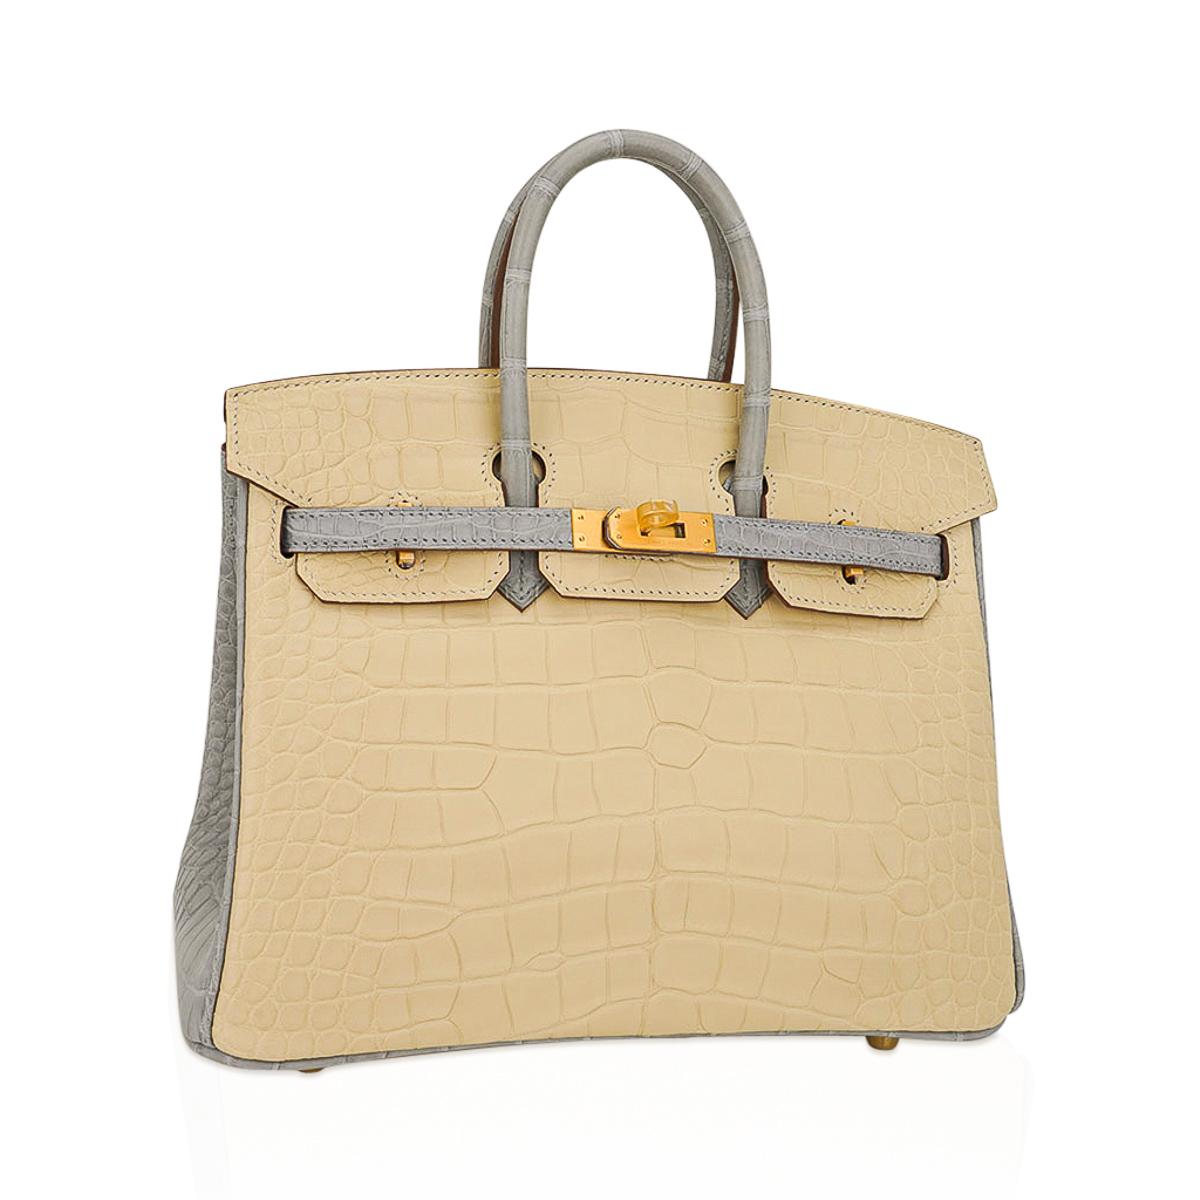 Mightychic offers an Hermes Birkin 25 bag featured in Vanille and Gris Pearl.
This elegant bag is enhanced by the matte Alligator.
Sophisticated colour combination with Brushed Gold hardware.
Comes with lock, keys, clochette, sleeper and signature